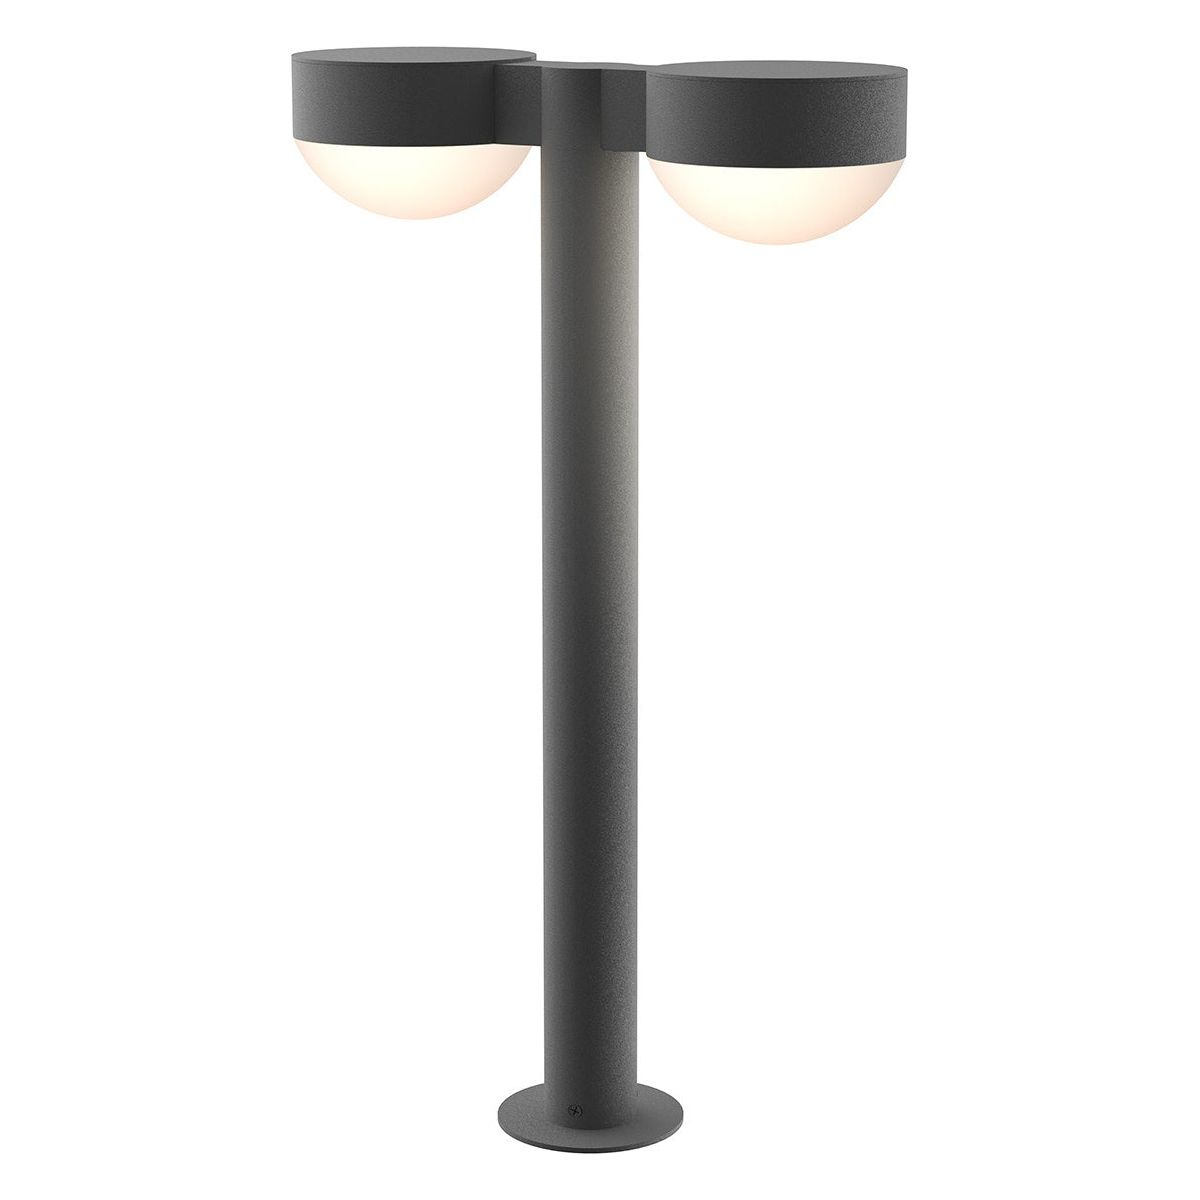 REALS 22" LED Double Bollard with Plate Cap and Dome Lens